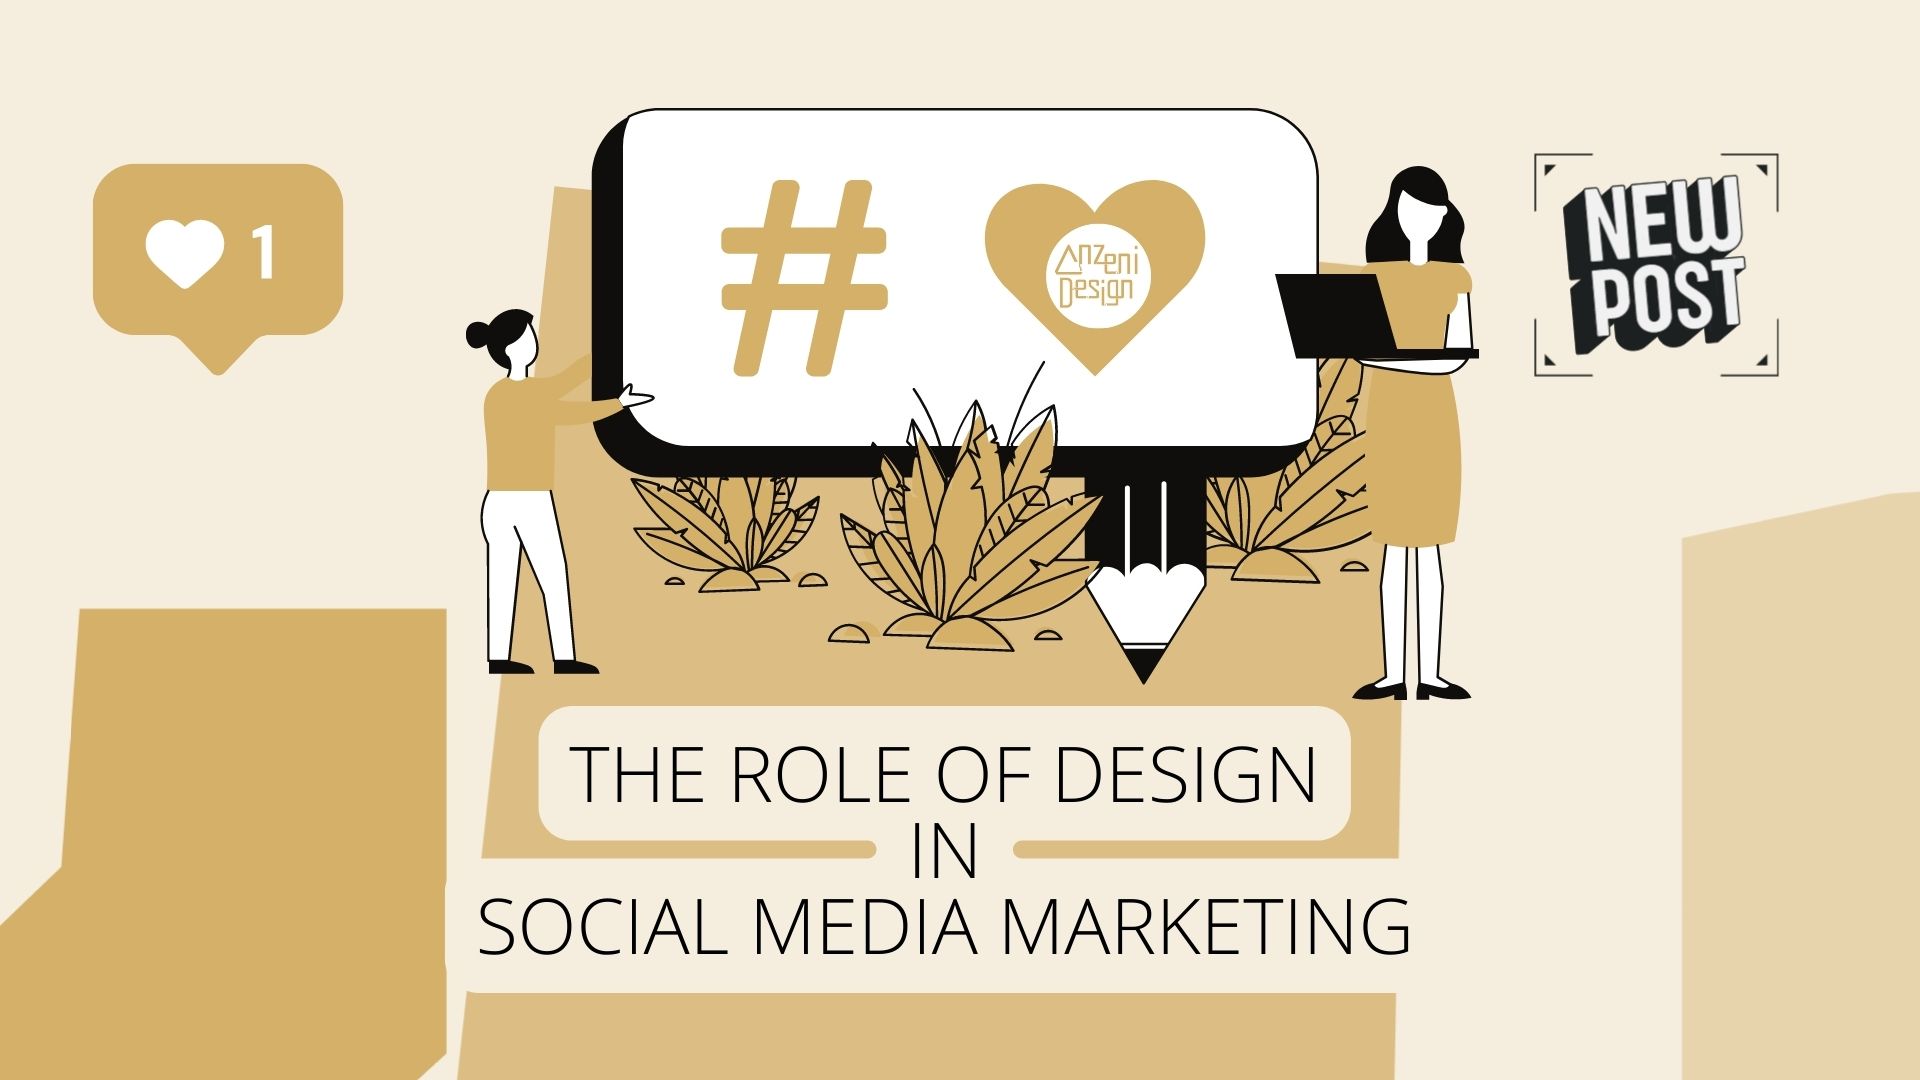 The role of design in social media marketing